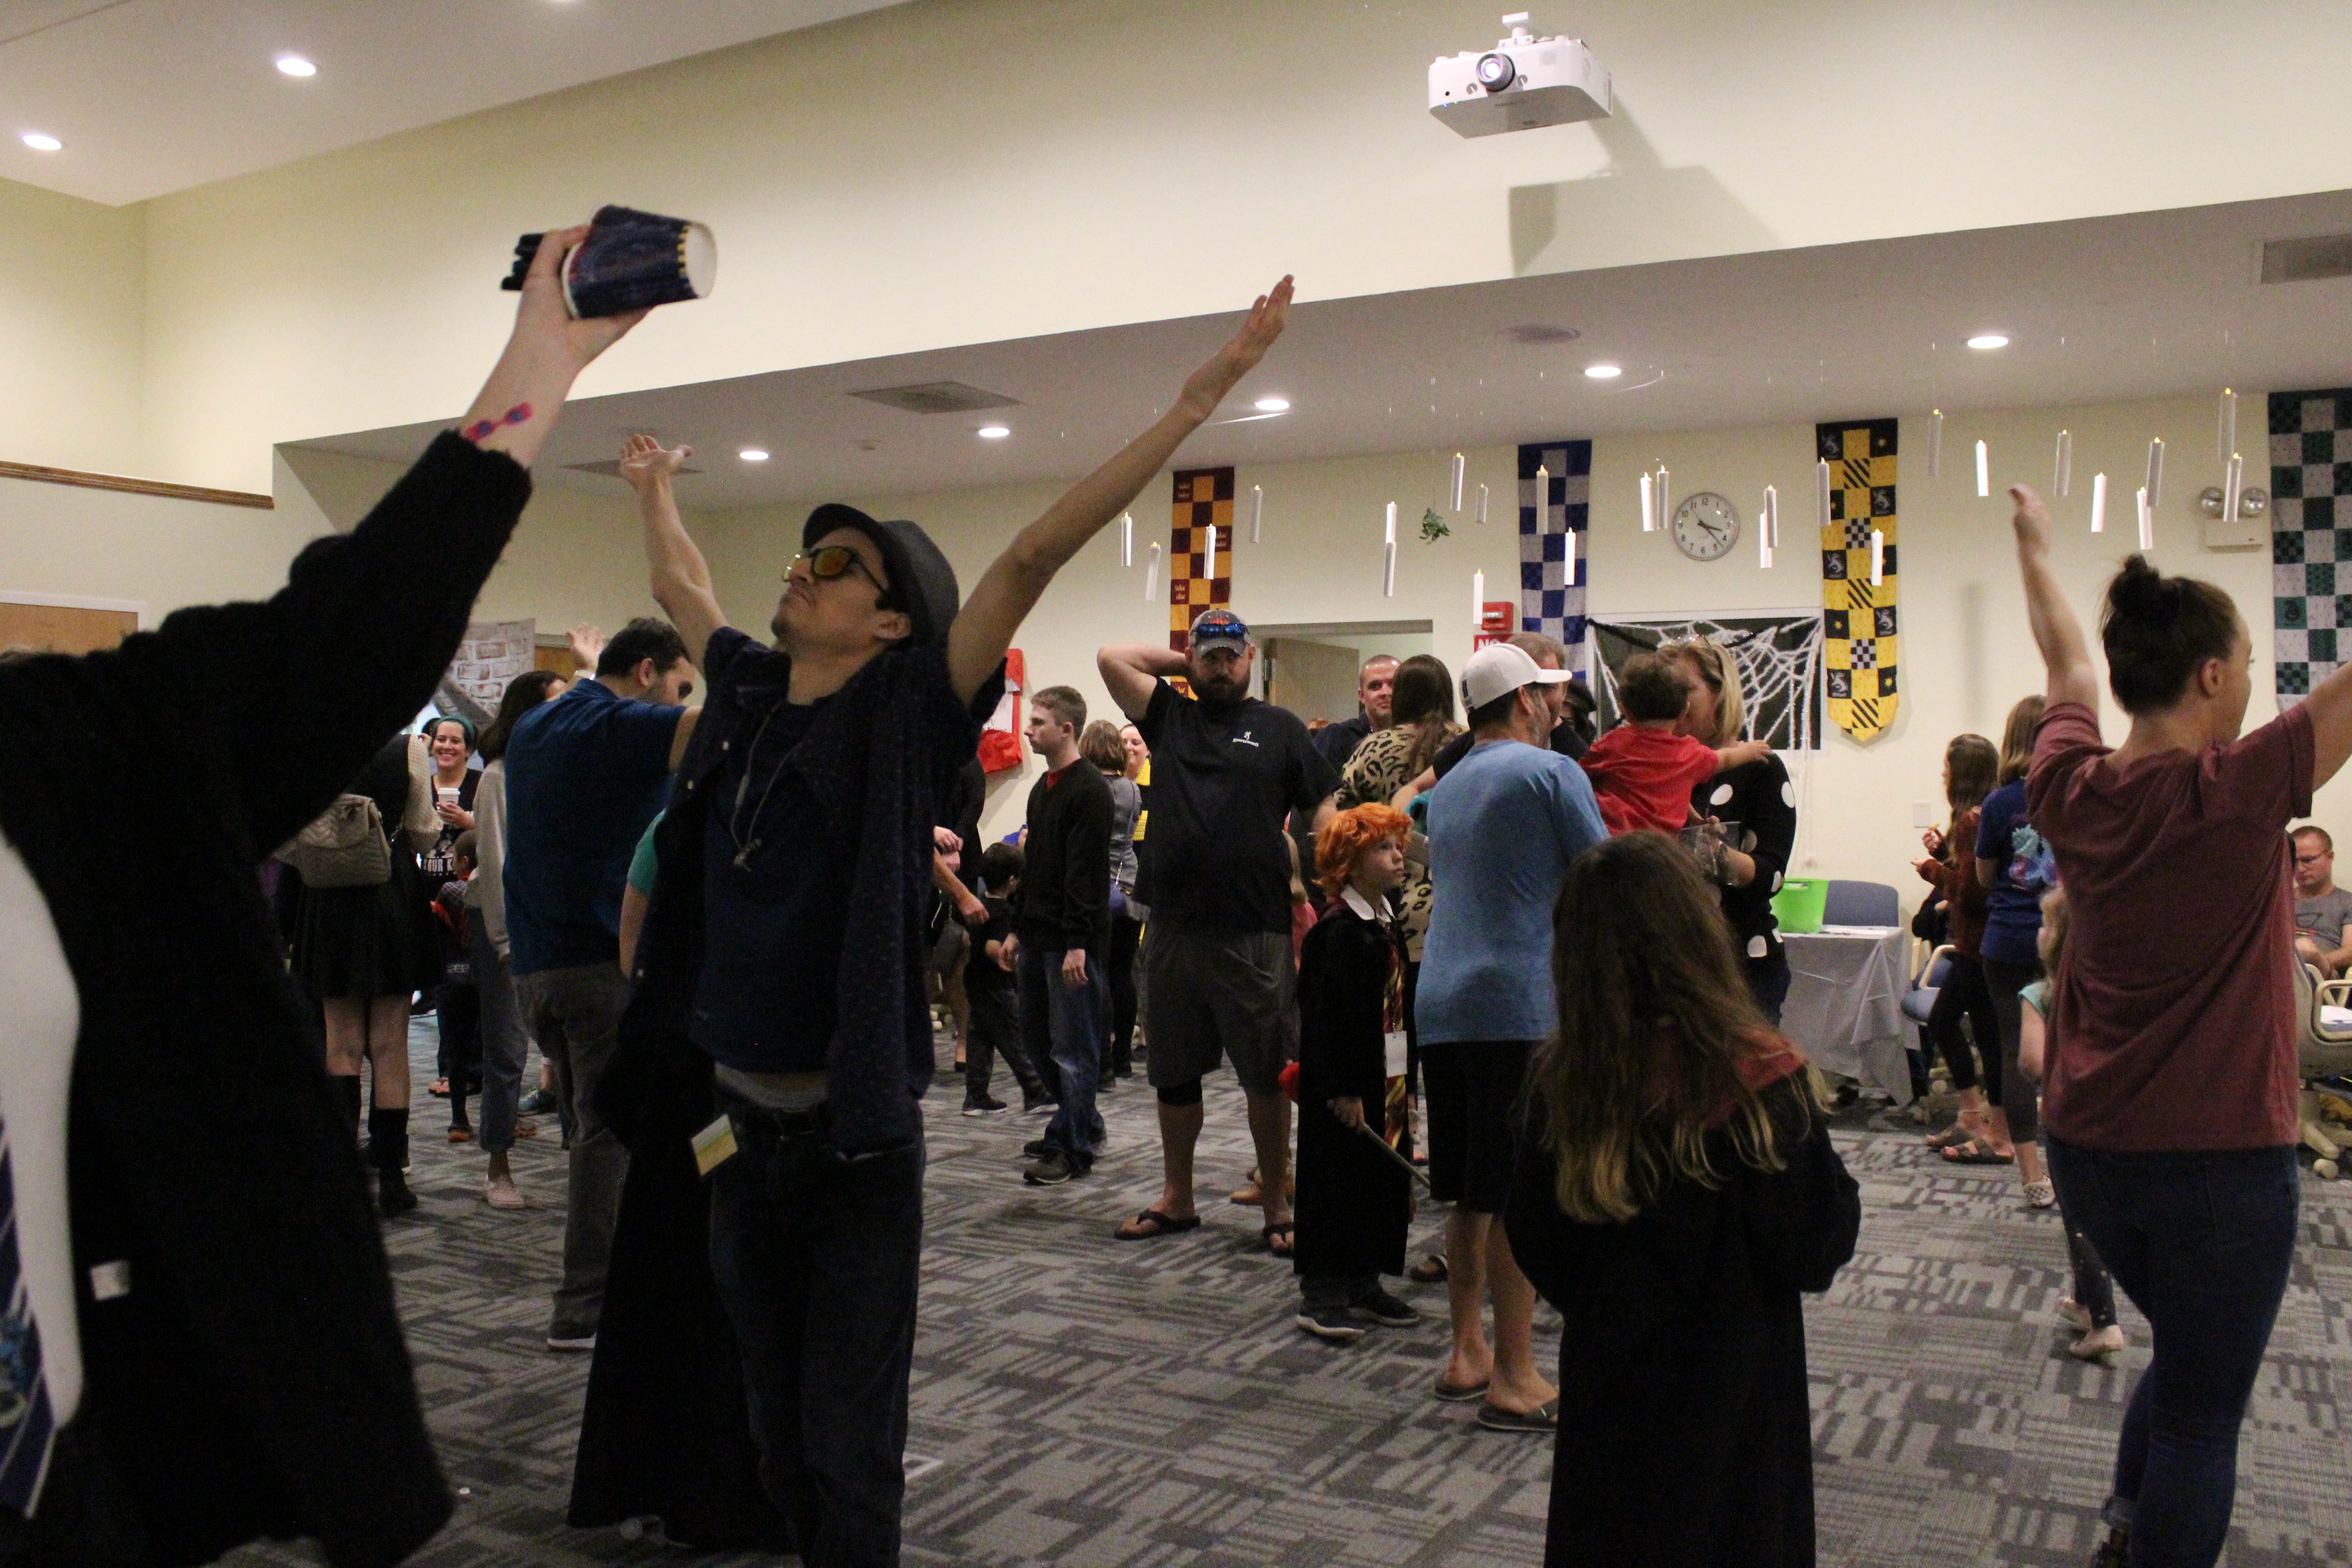 Several cosplayers dance in wizards robes at the library